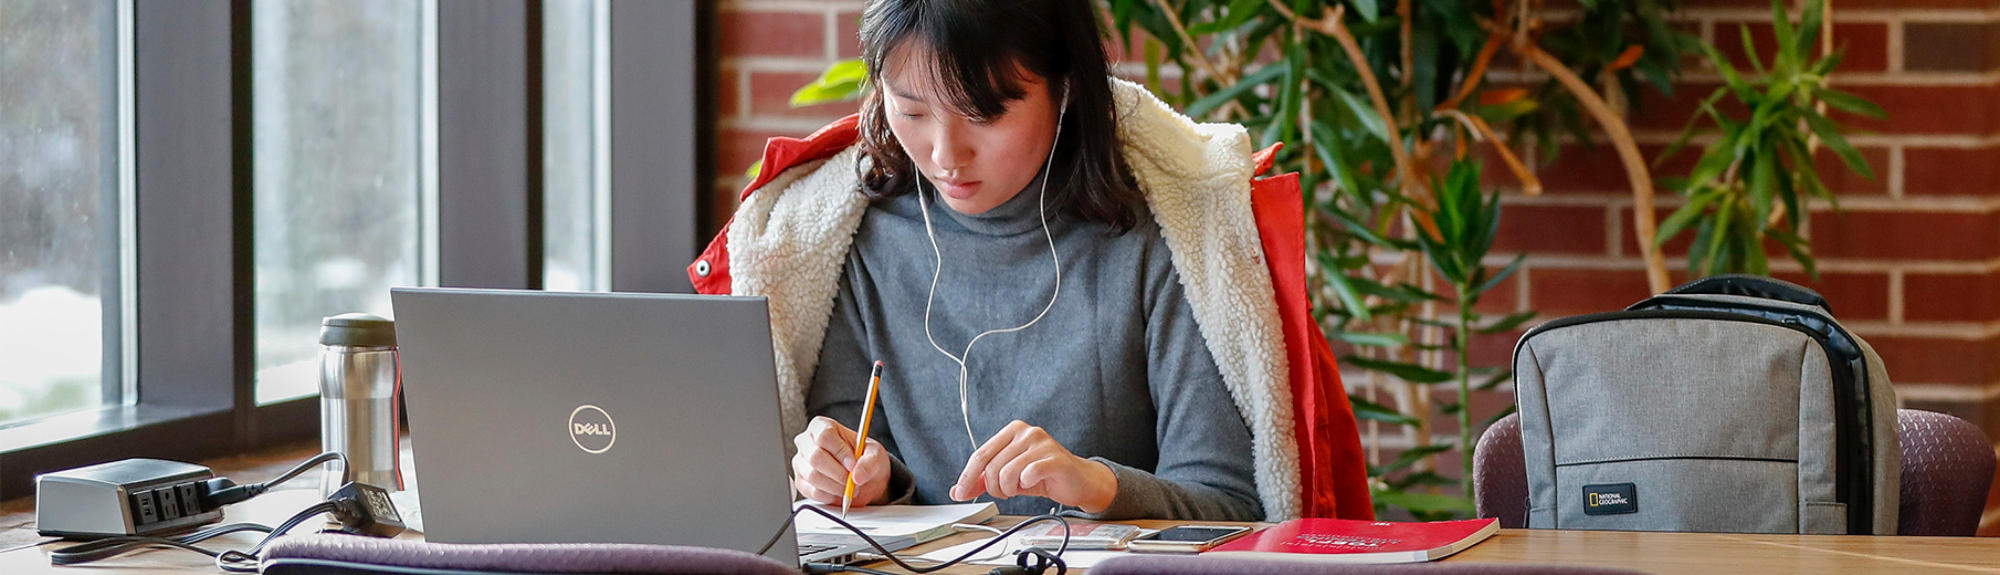 A student studies on her laptop